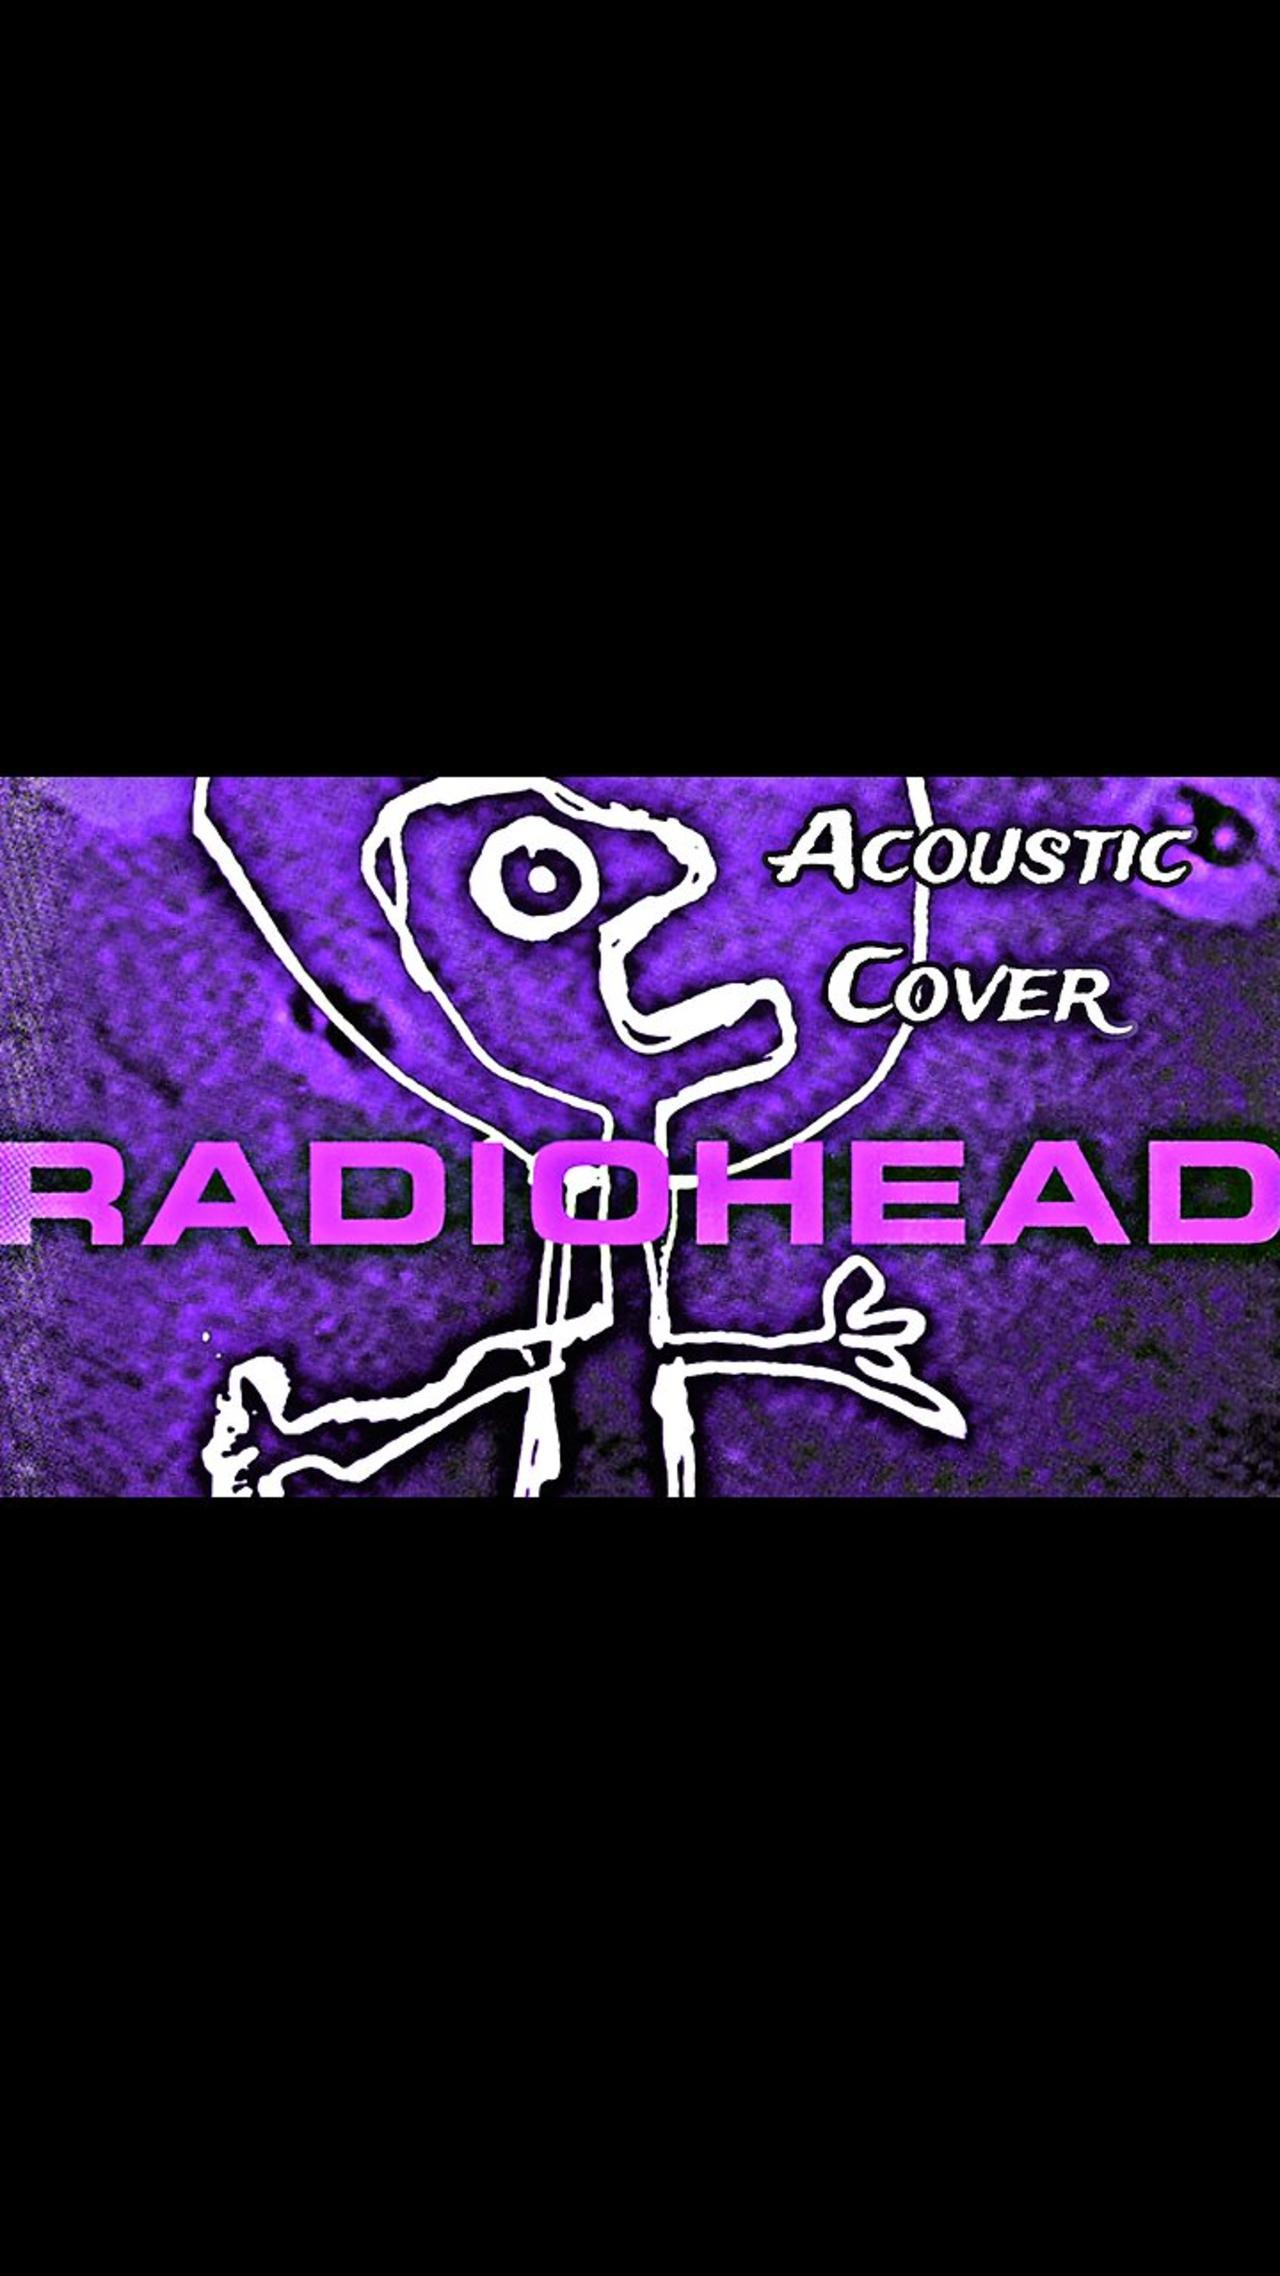 Acoustic Cover - Radiohead High & Dry